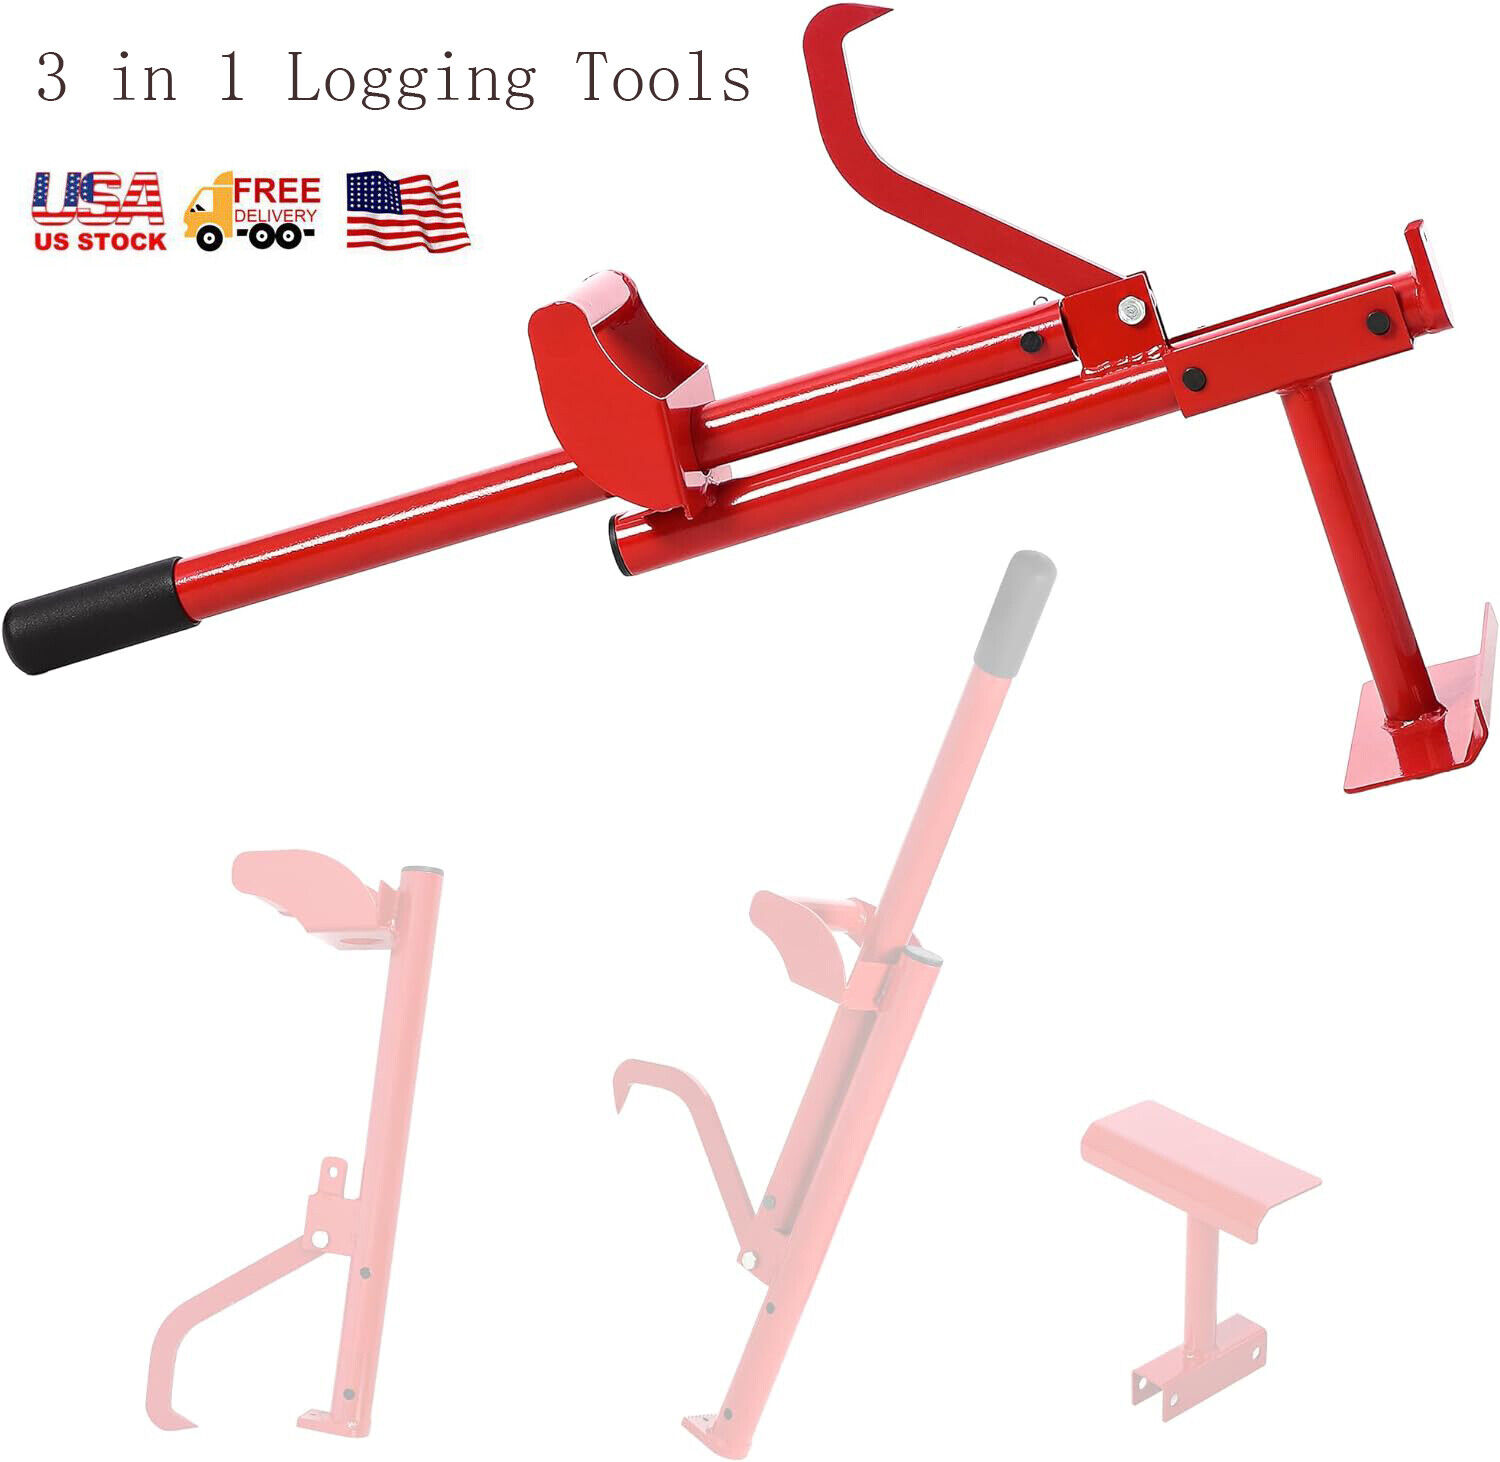 3 in 1 Logging Tool Cant Hook Forestry Multitool Firewood Harvesting Manual Tool